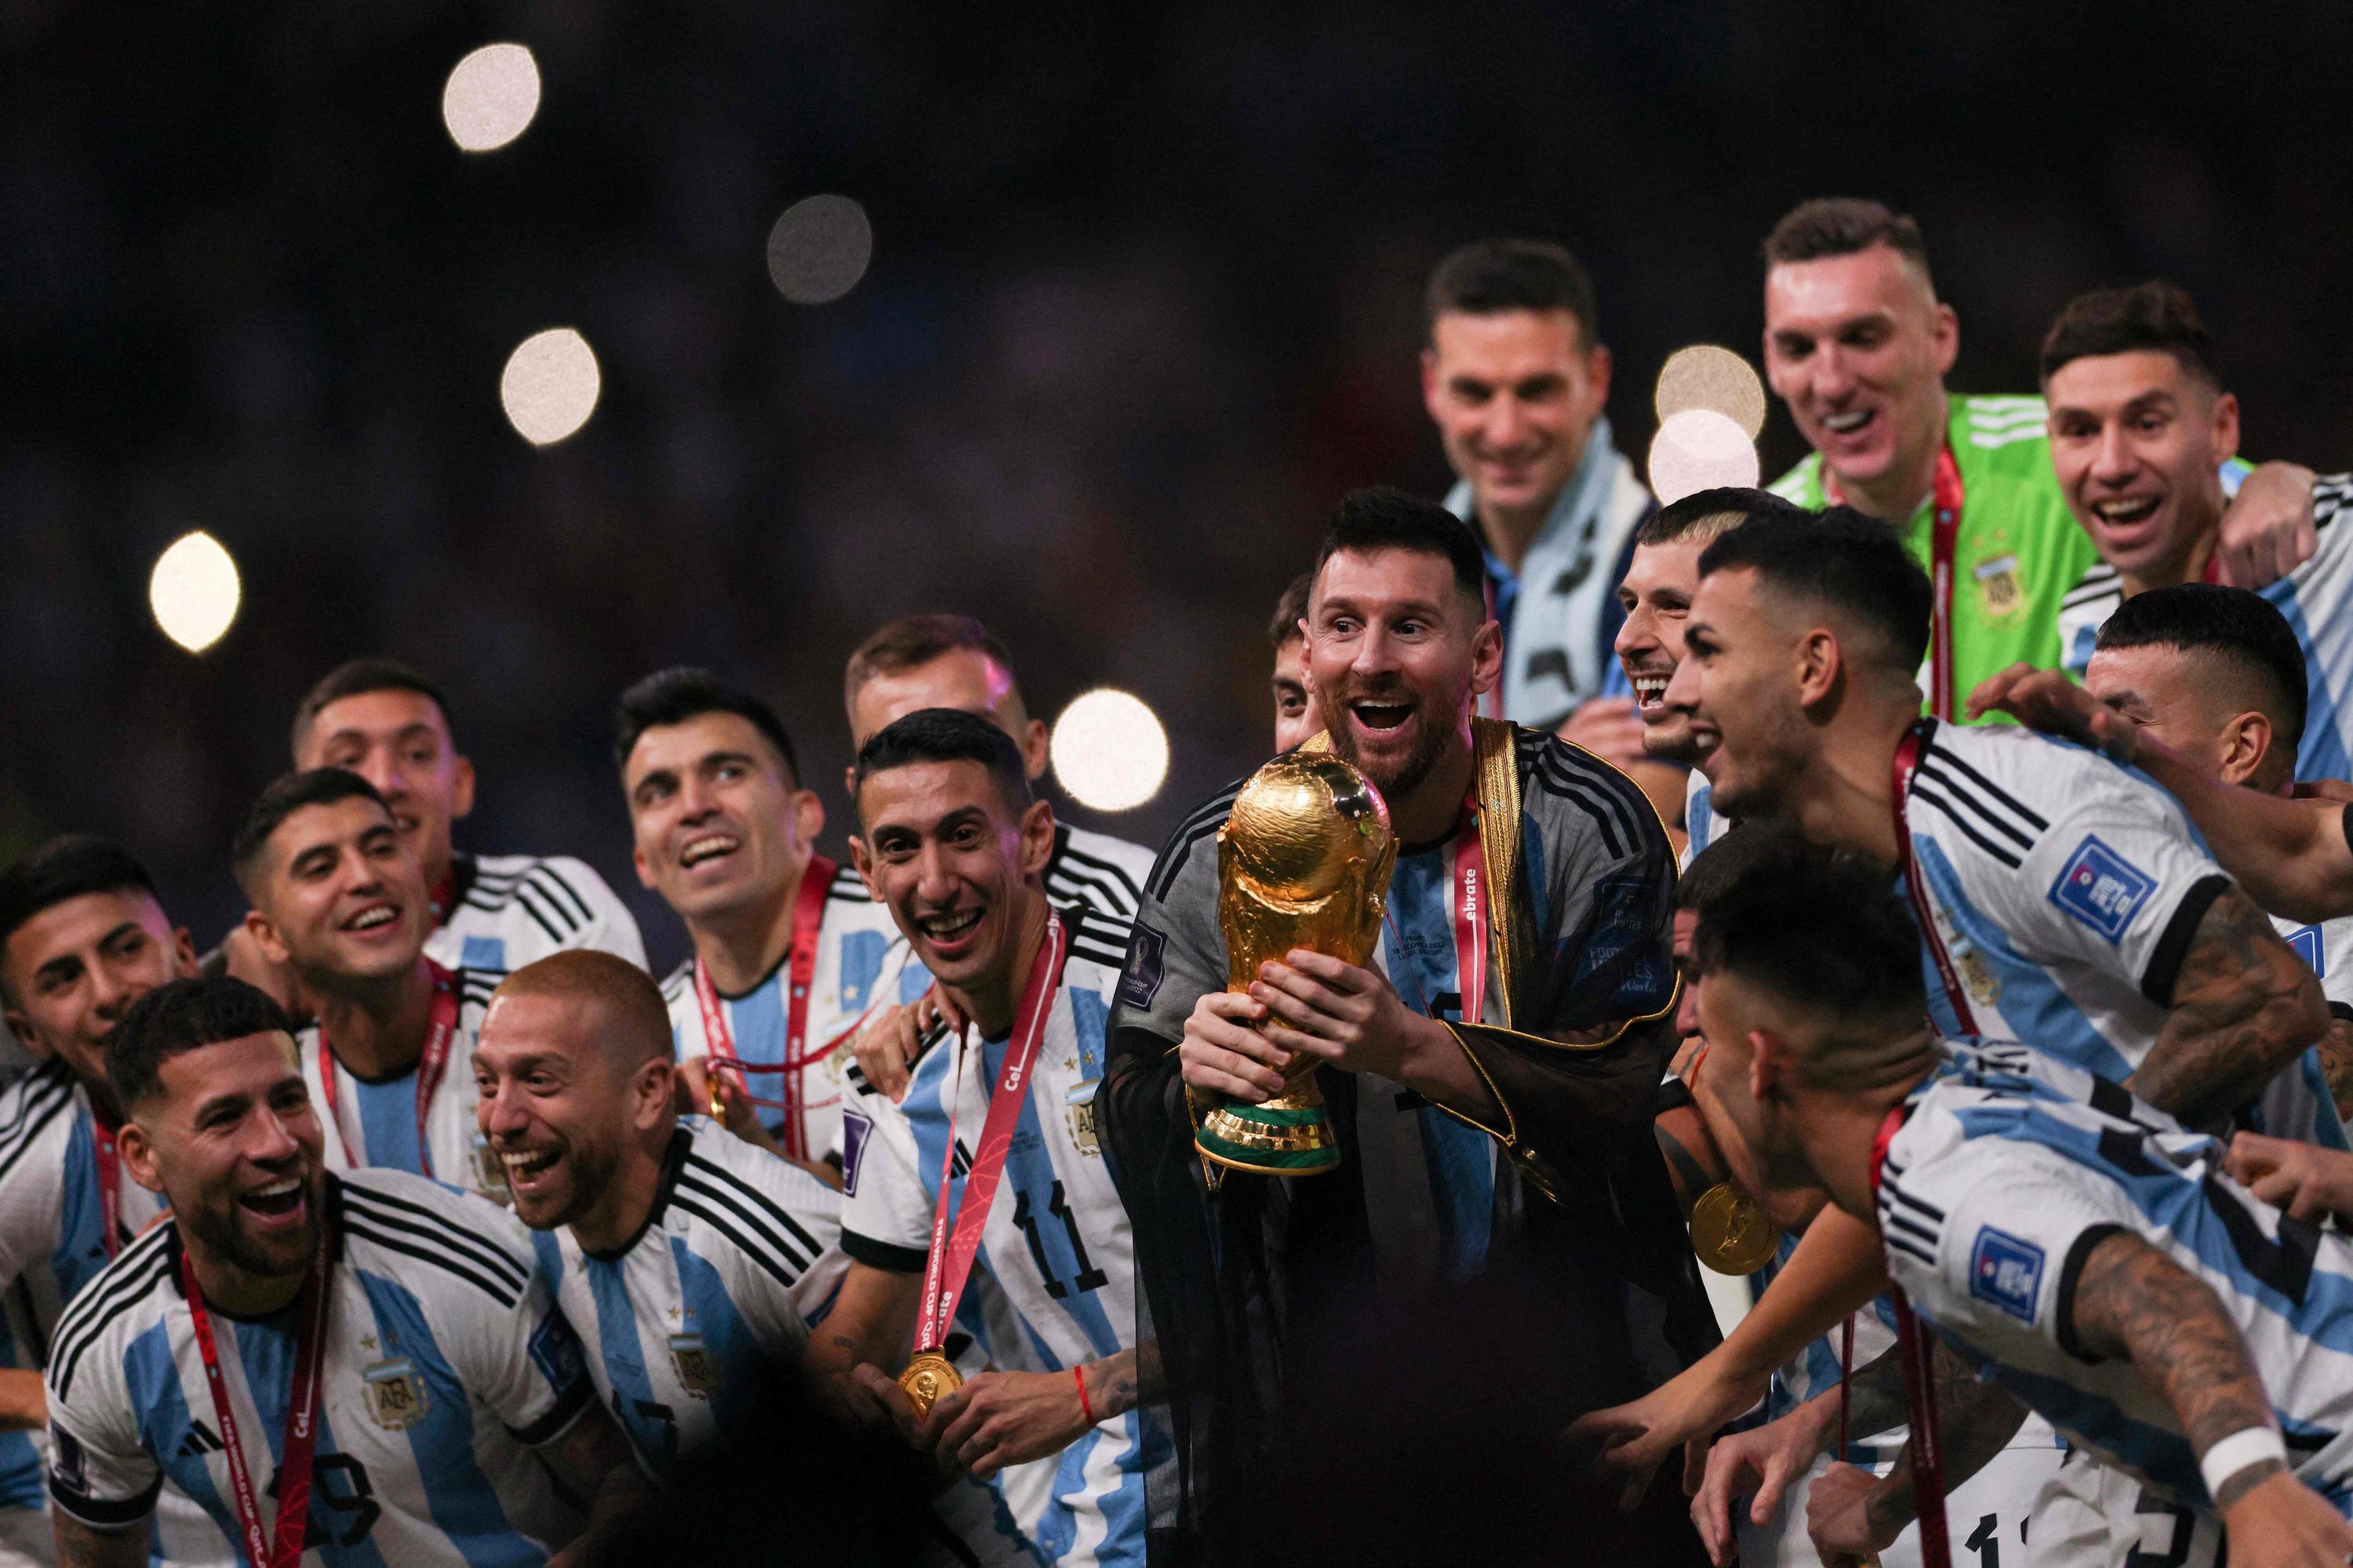 Argentina's World Cup Champions Gather for First Time Since Qatar